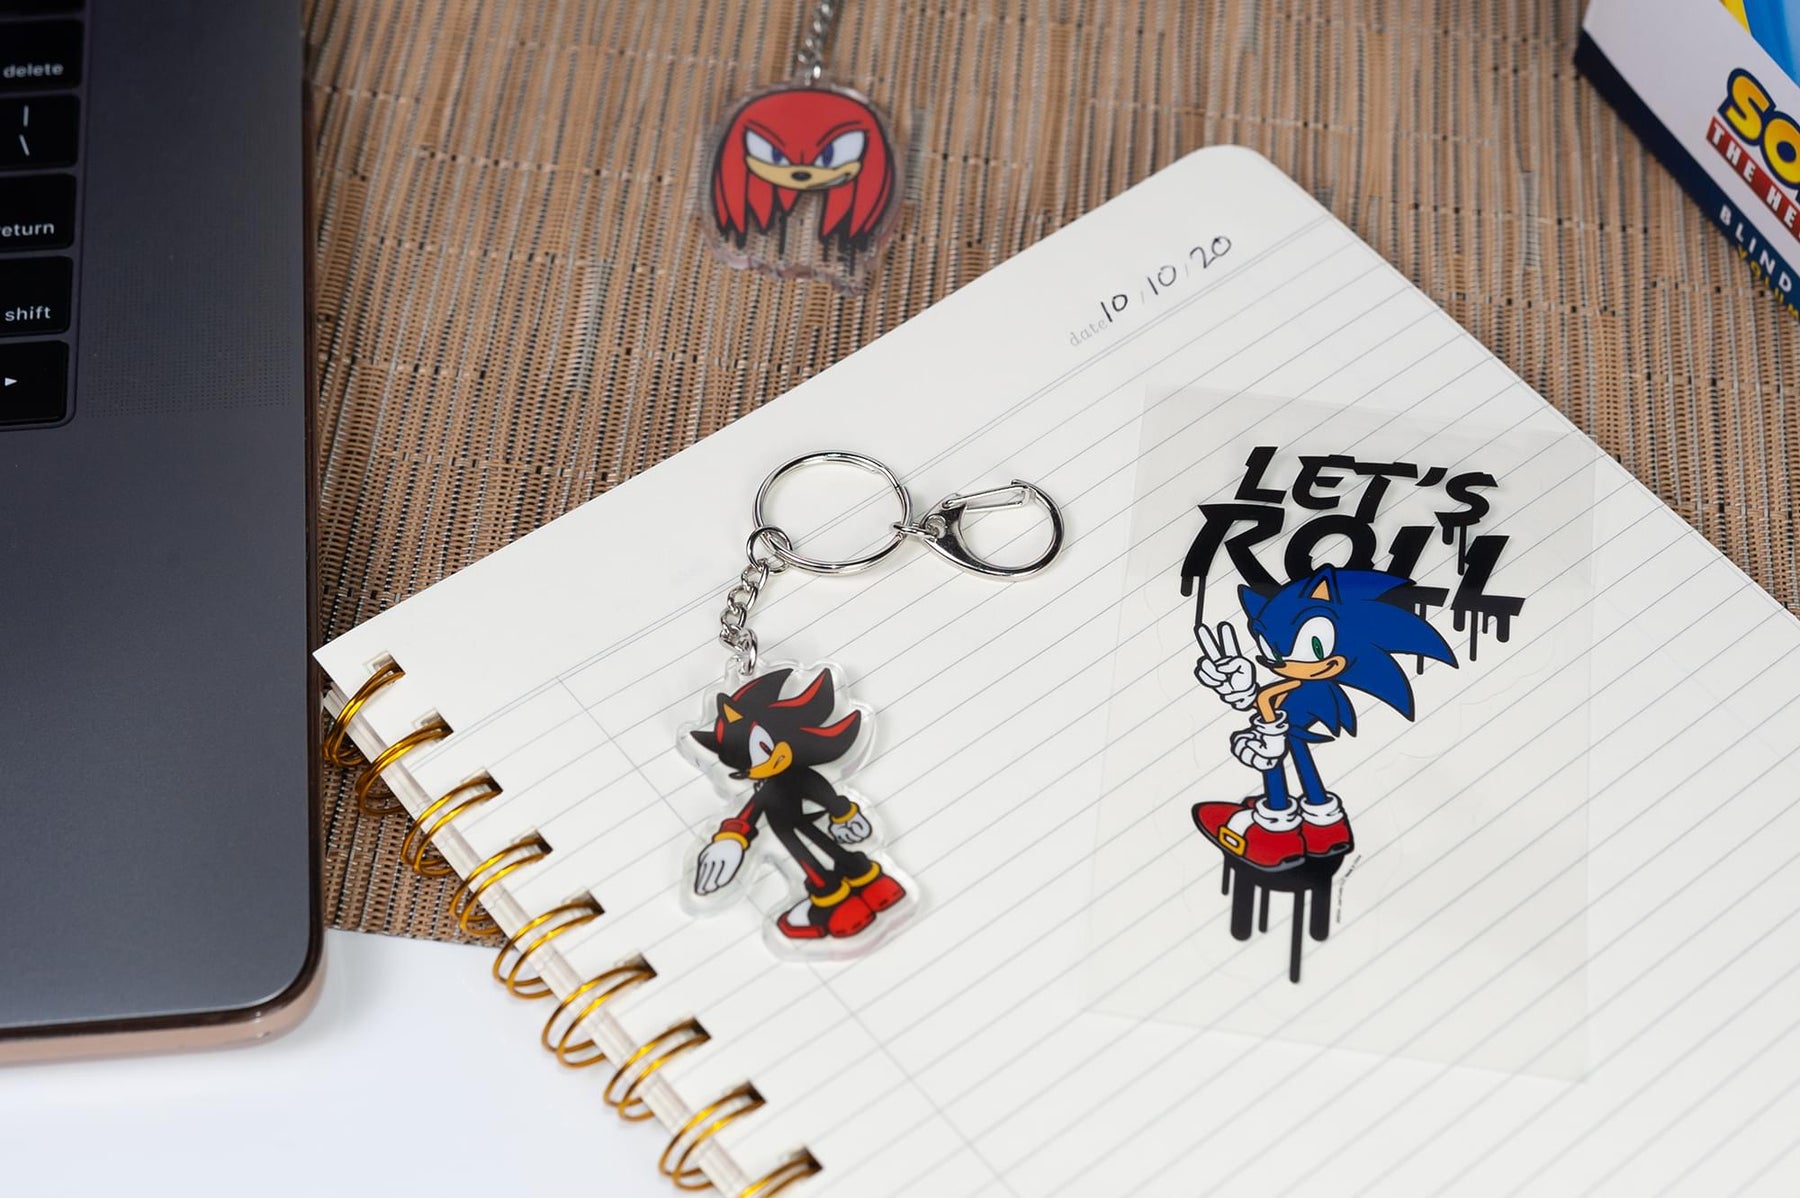 Sonic the Hedgehog Urban Modern Collector Looksee Box | Includes 5 Themed Collectibles